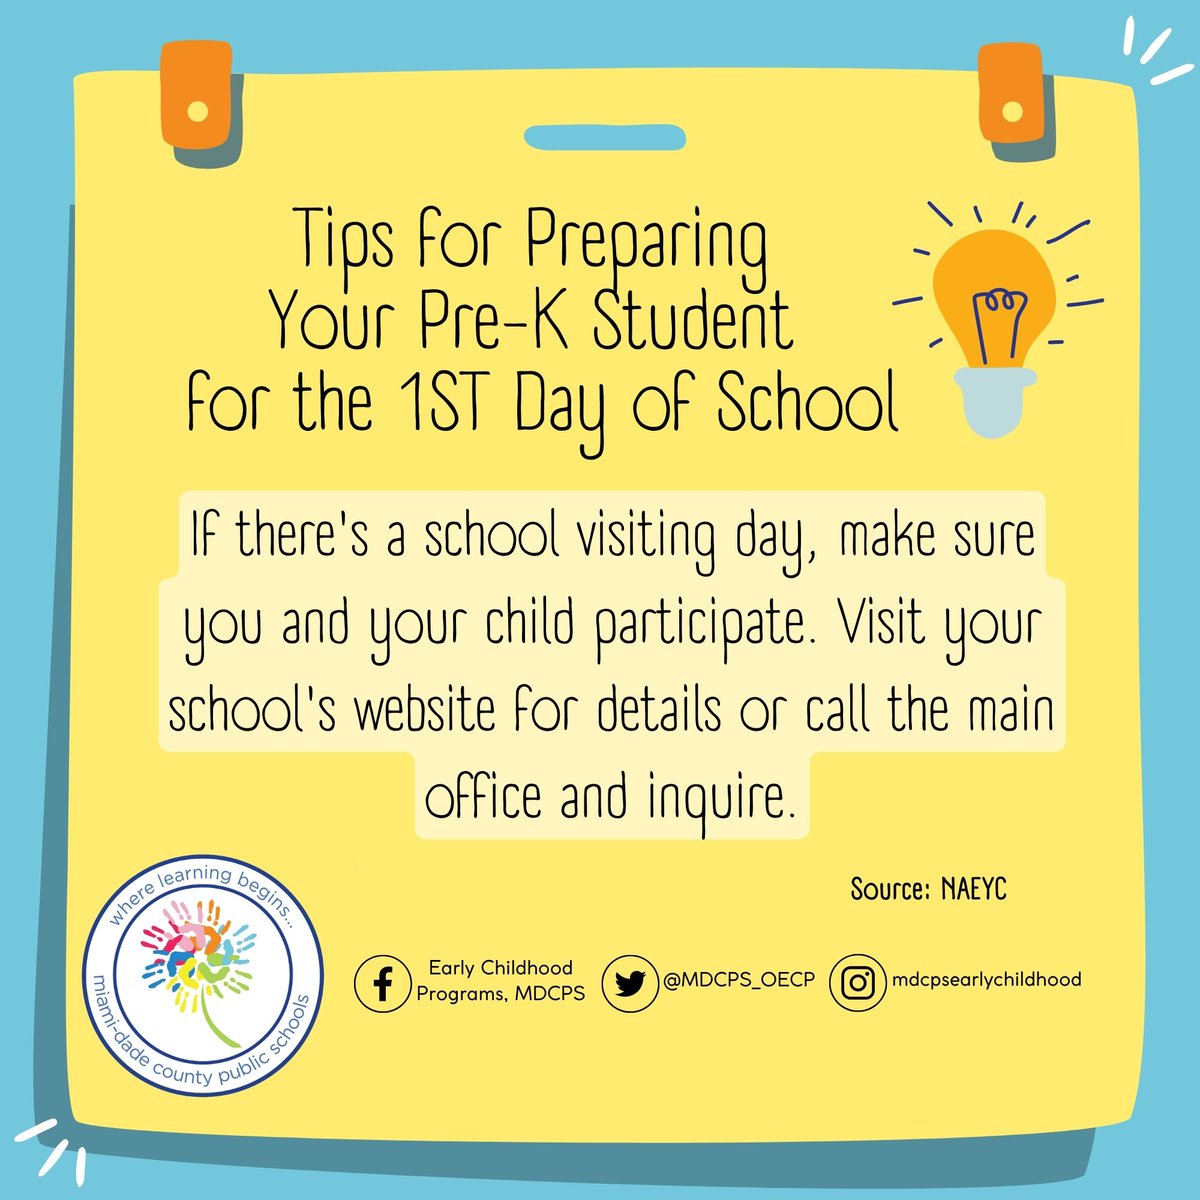 Help your child be #MDCPSReady!